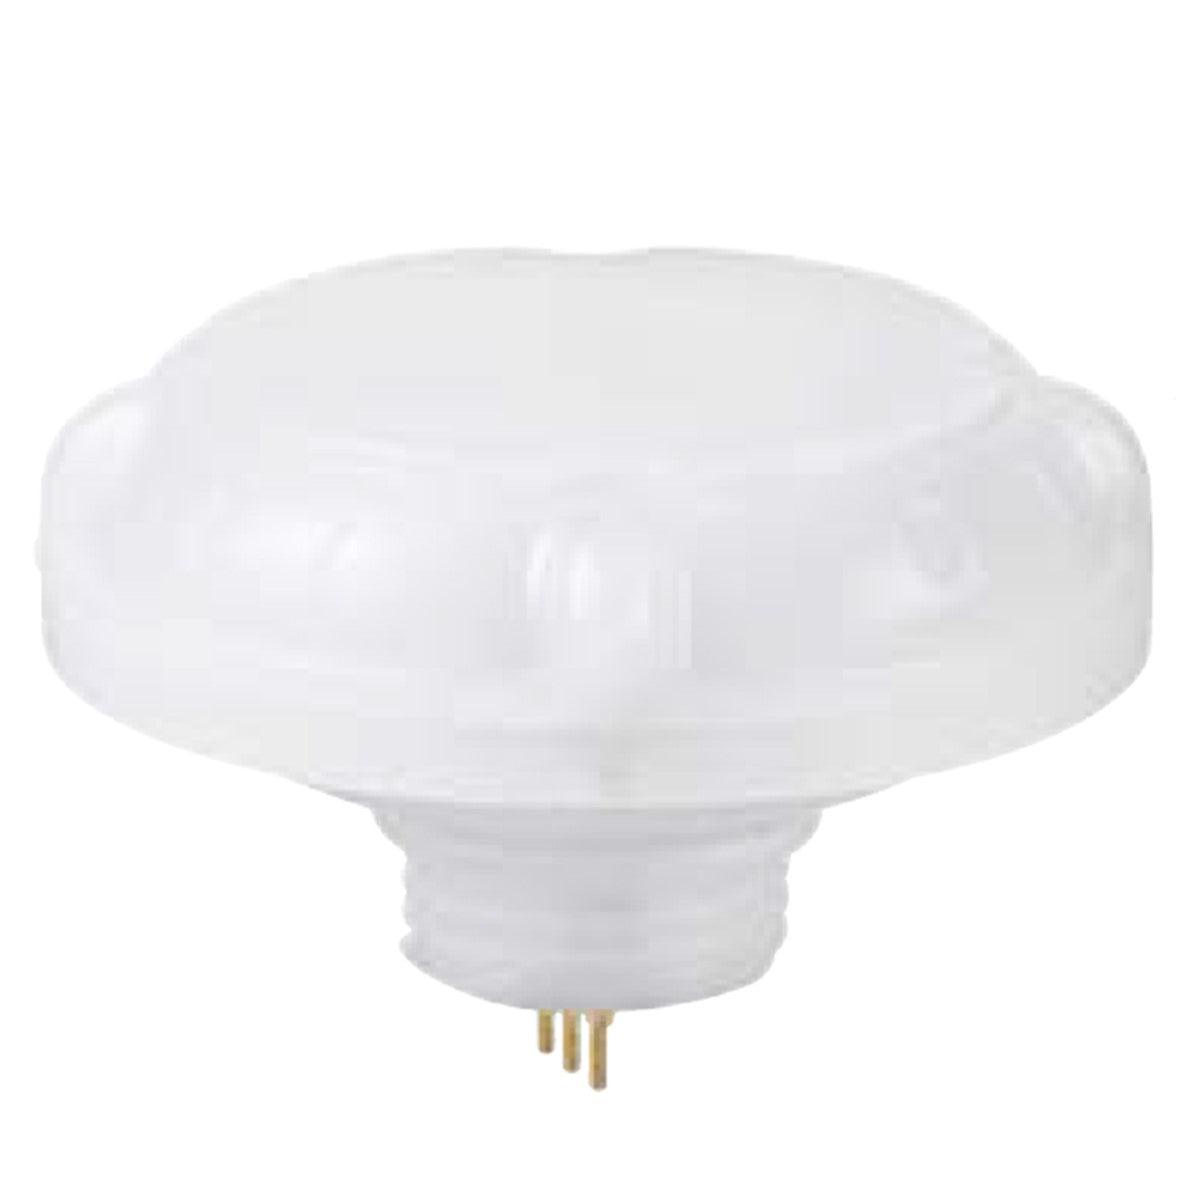 Sylvania High Bay Mircrowave Motion/Daylight Sensor, Remote Required To Change Default Settings - Bees Lighting